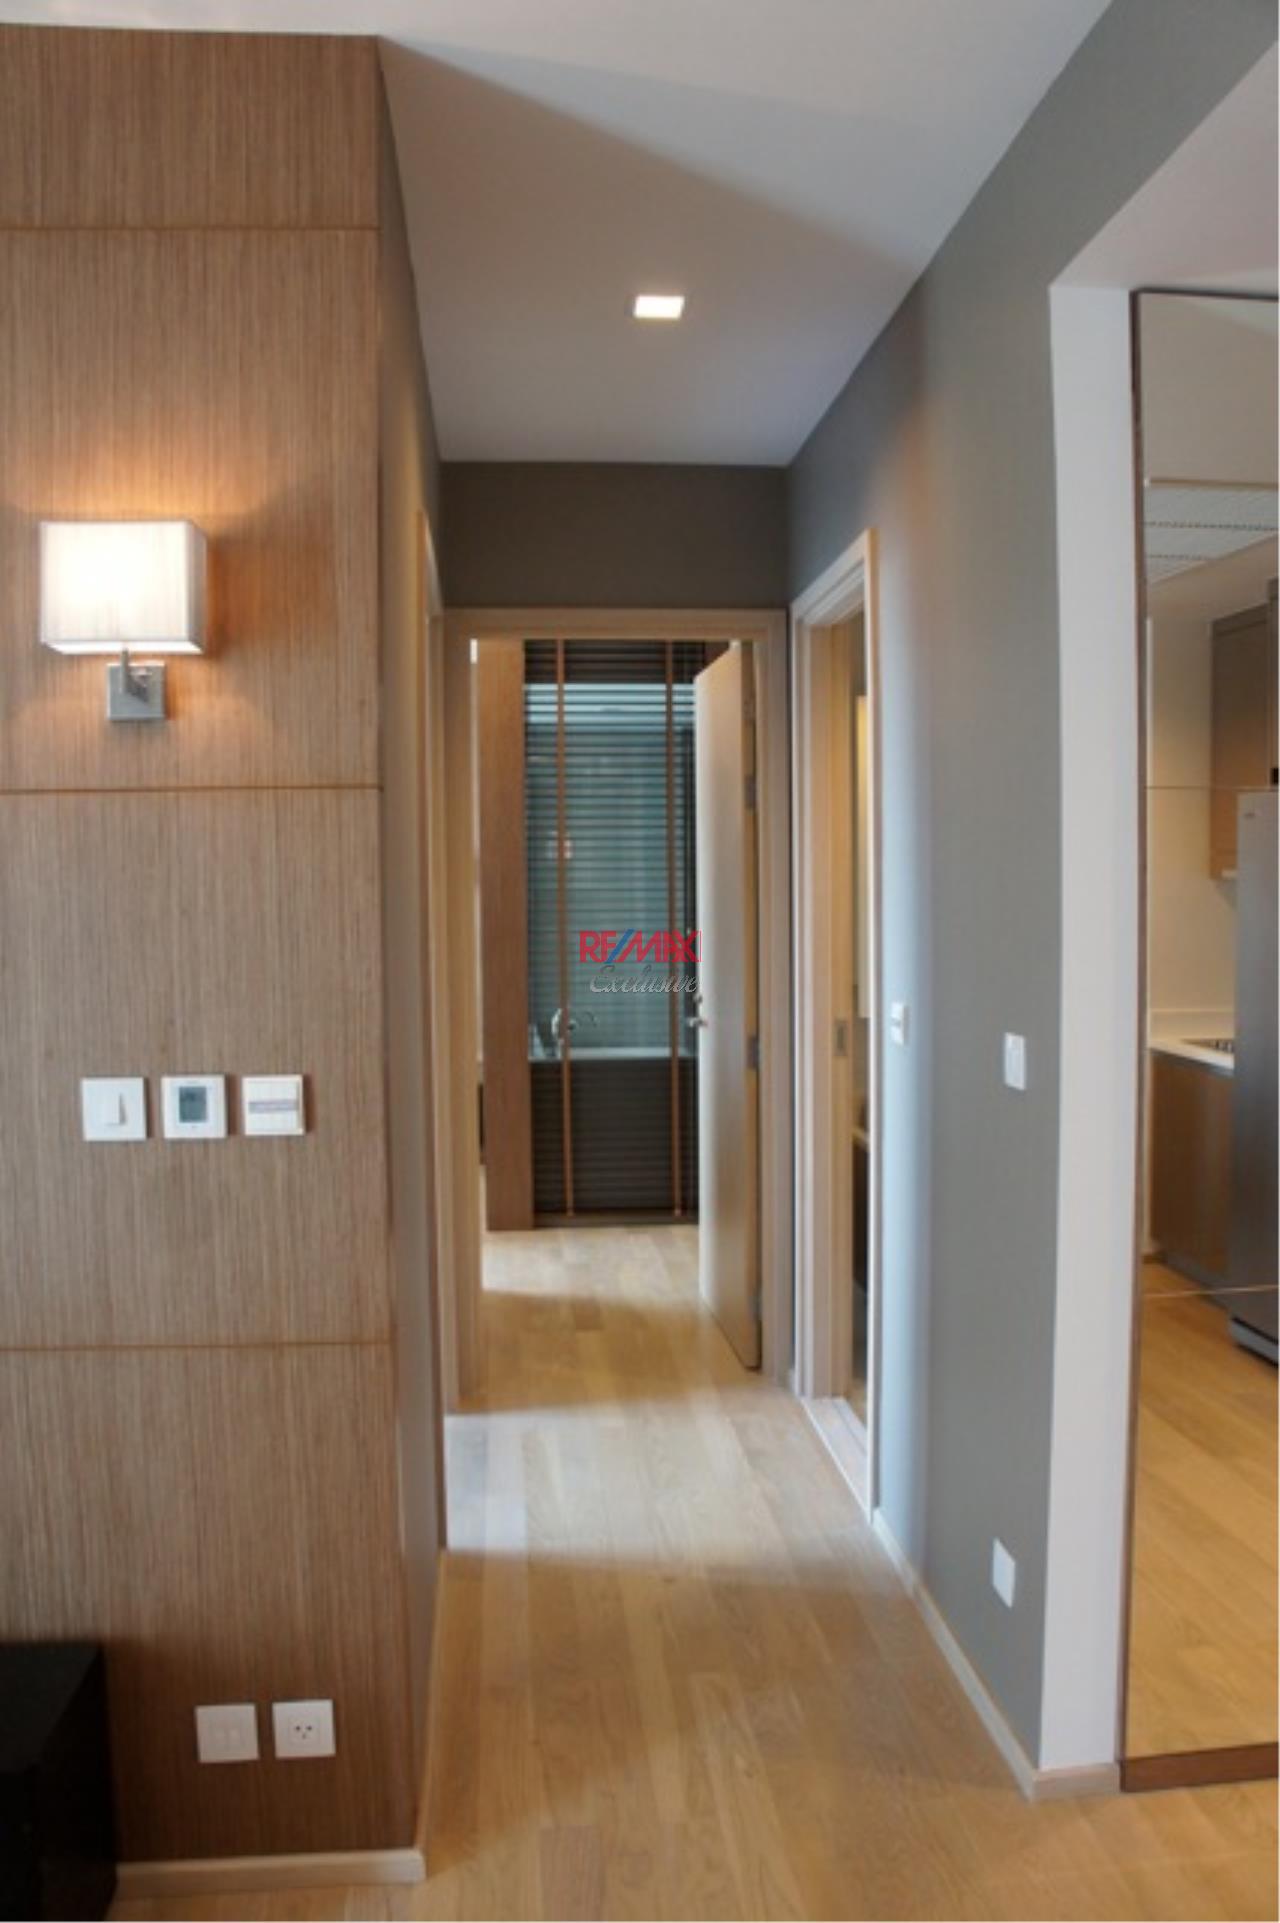 RE/MAX Exclusive Agency's Siri @ Sukhumvit 2 Bedrooms, 70 Sqm., For Rent 65,000 THB!! 4